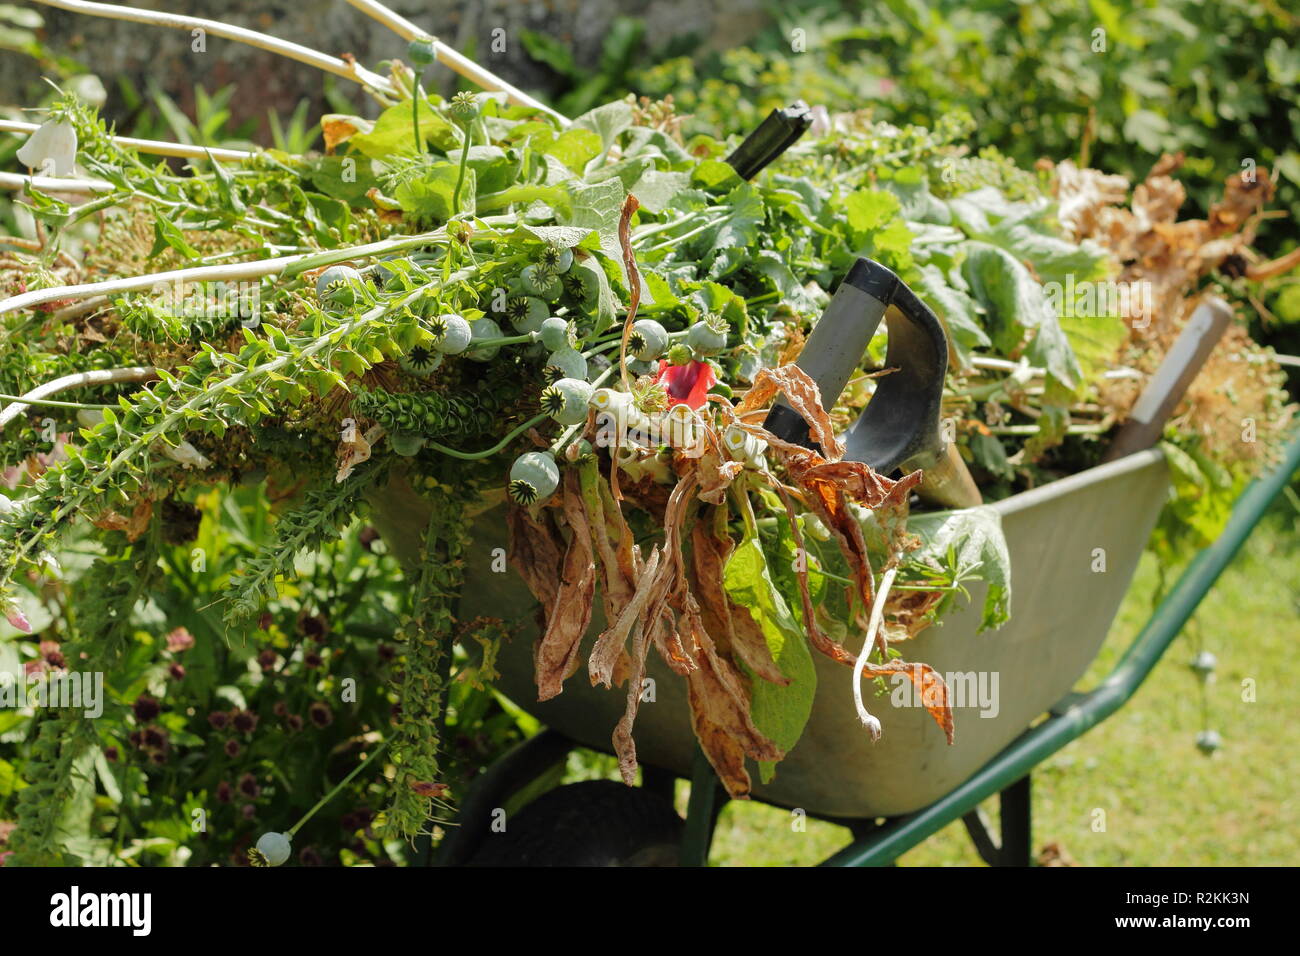 A wheelbarrow filled with spent plants and flowers in an English garden in simmer,UK Stock Photo